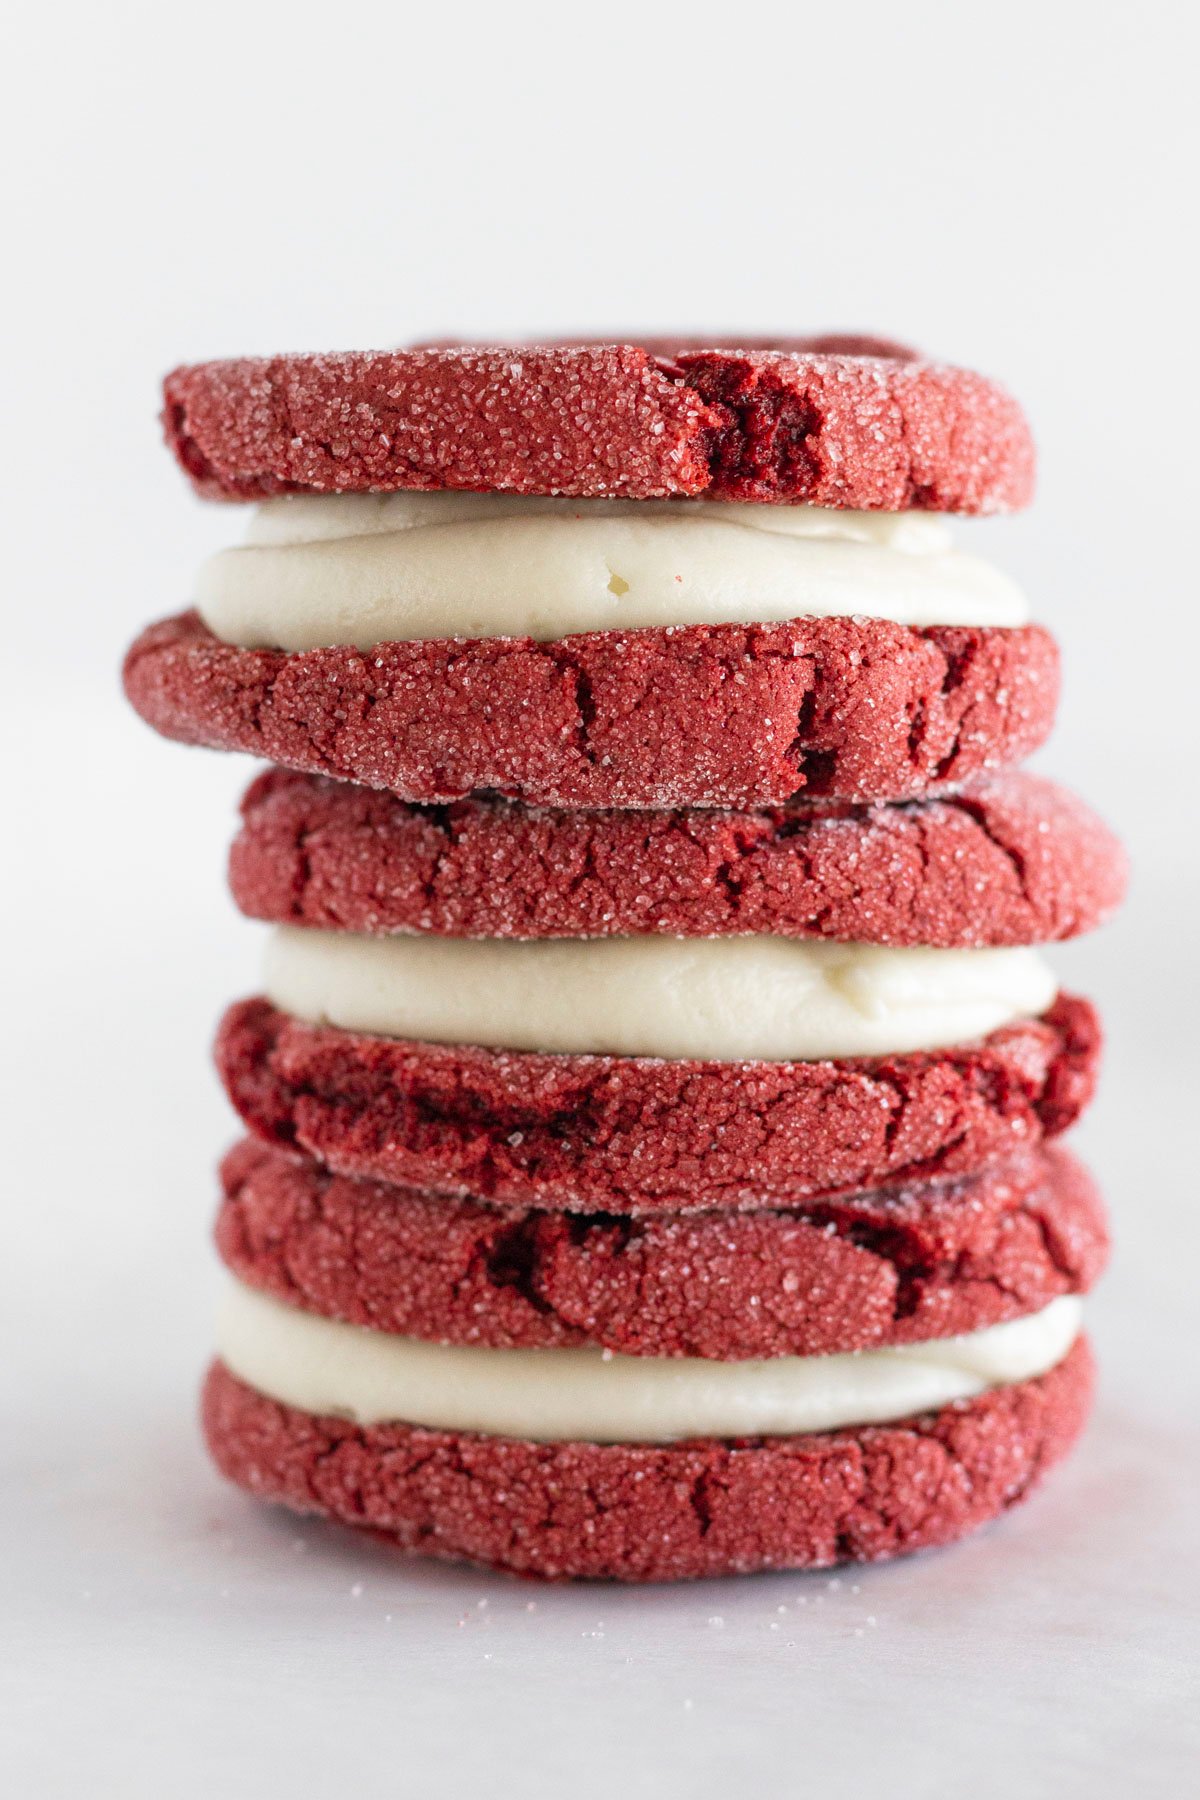 Three Red Velvet Sandwich Cookies stacked on top of each other.